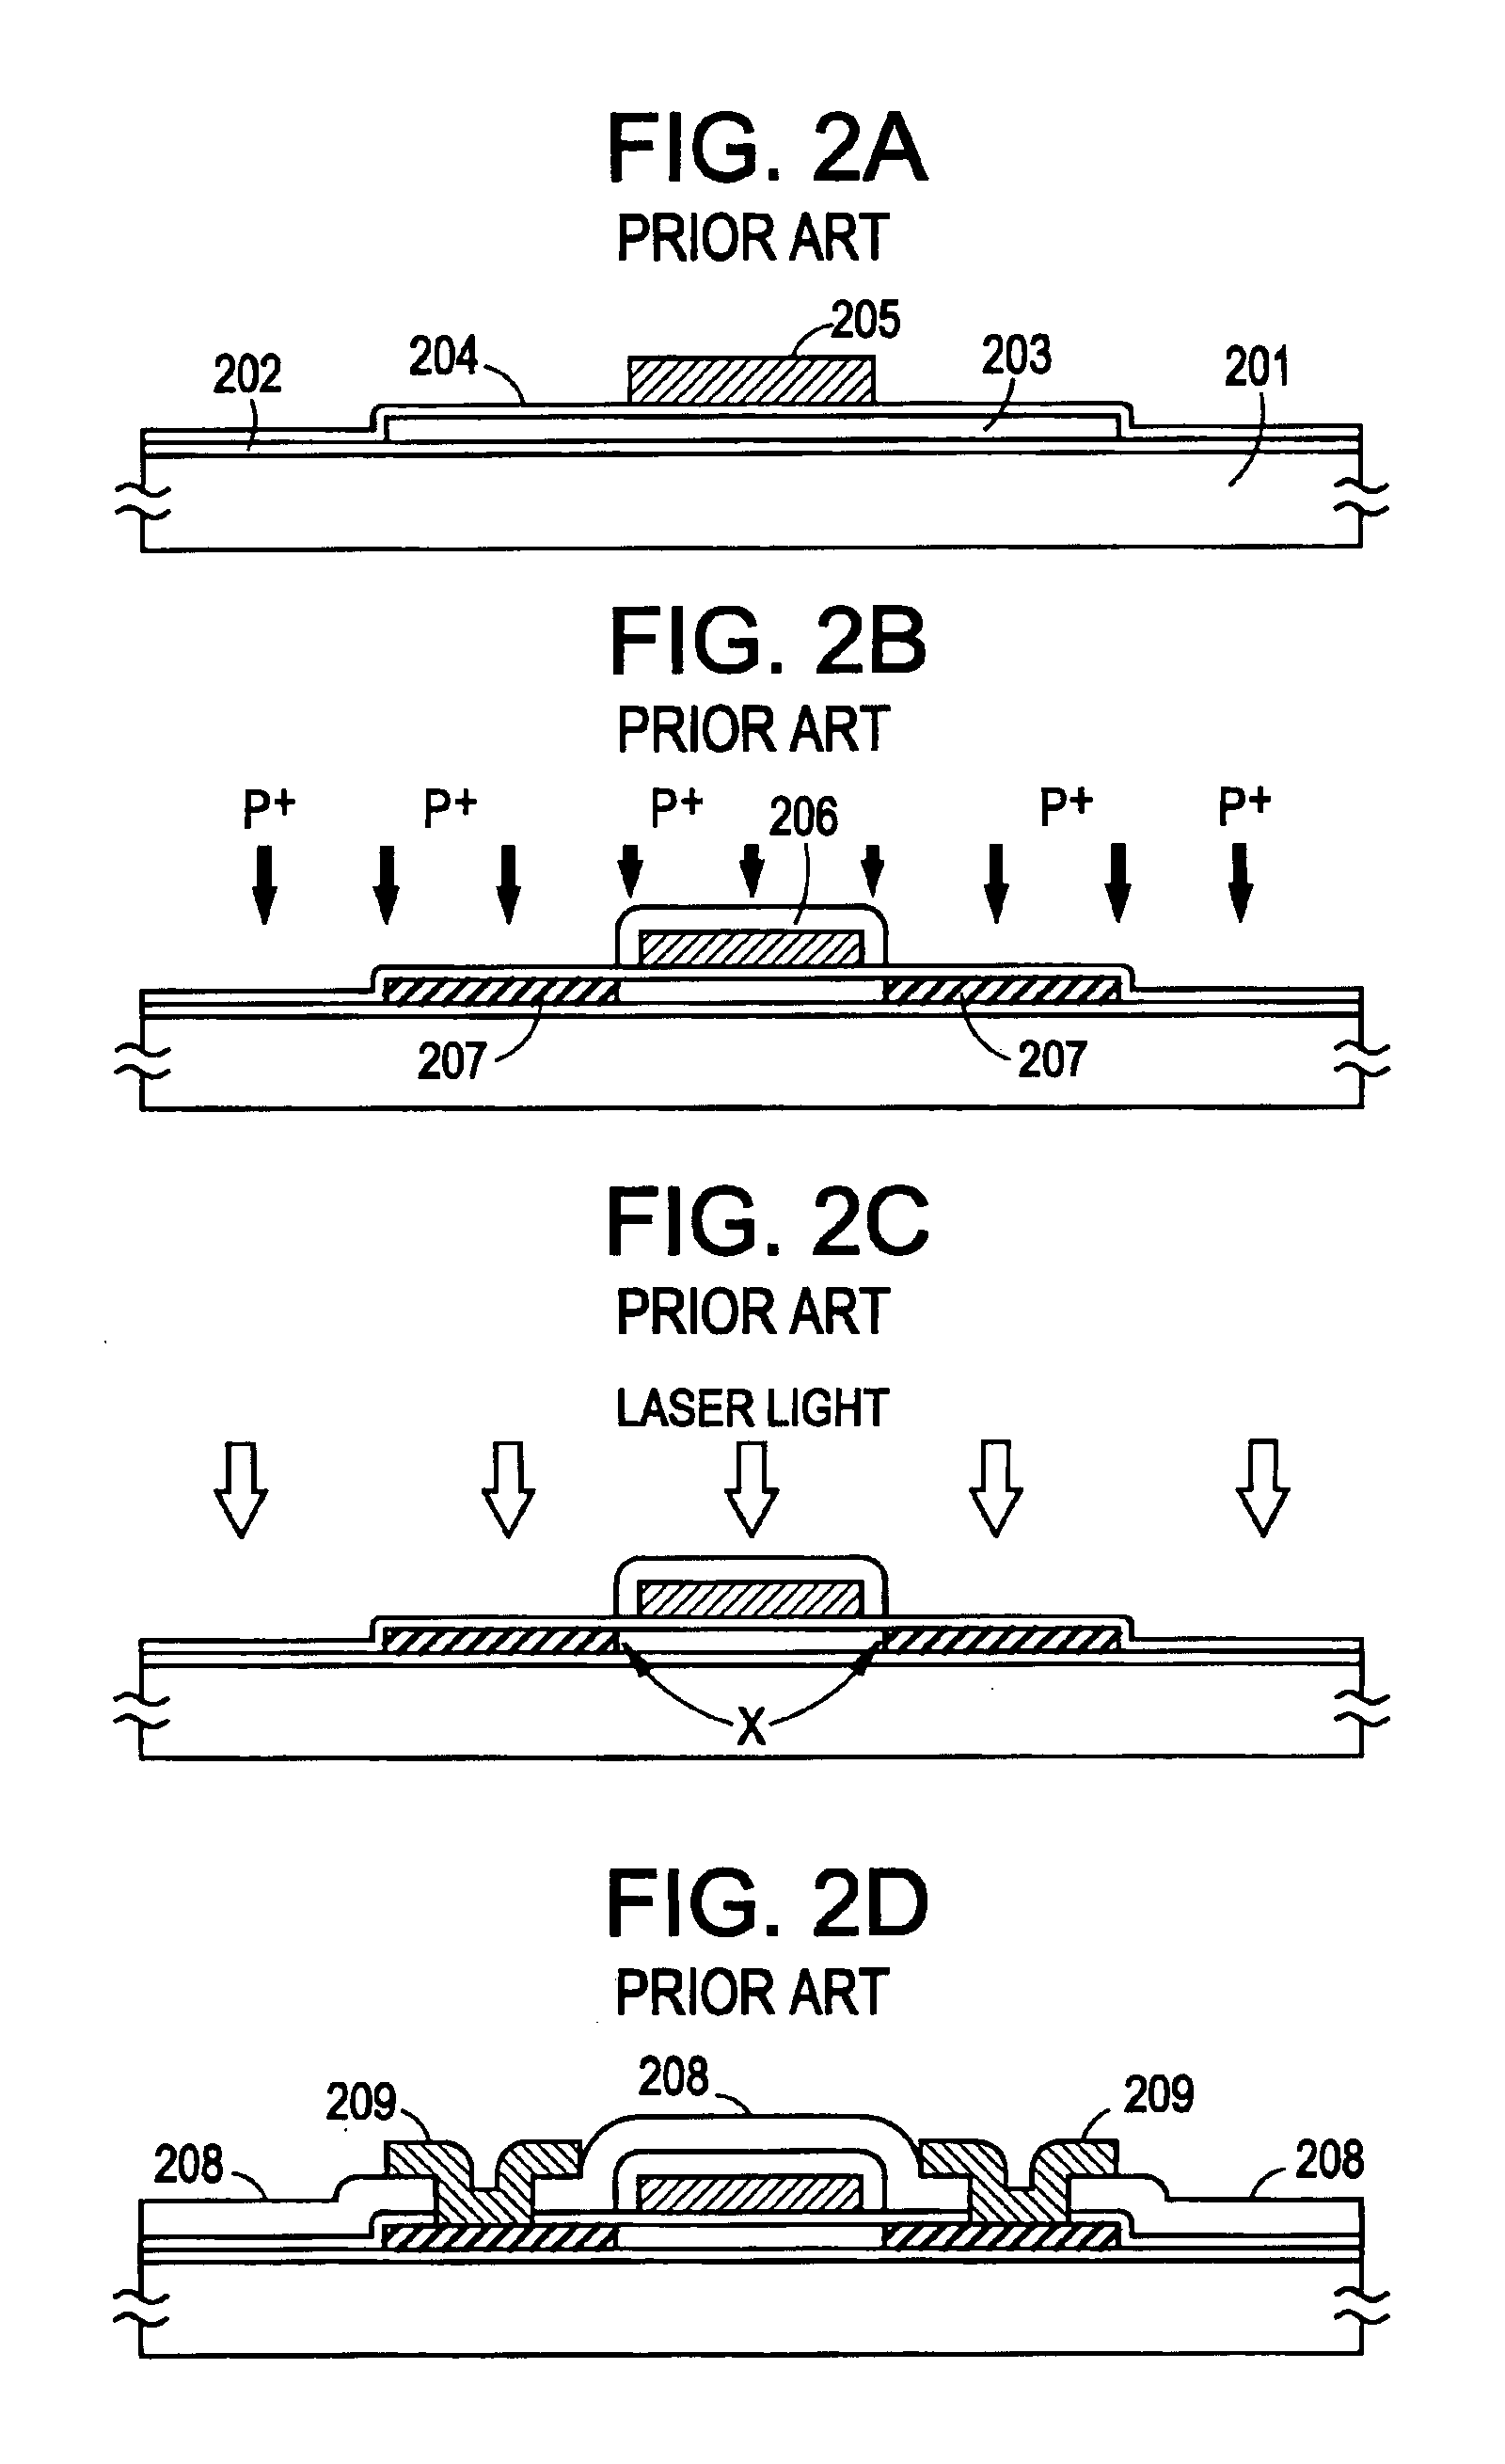 Semiconductor device having a gate oxide film with some NTFTS with LDD regions and no PTFTS with LDD regions